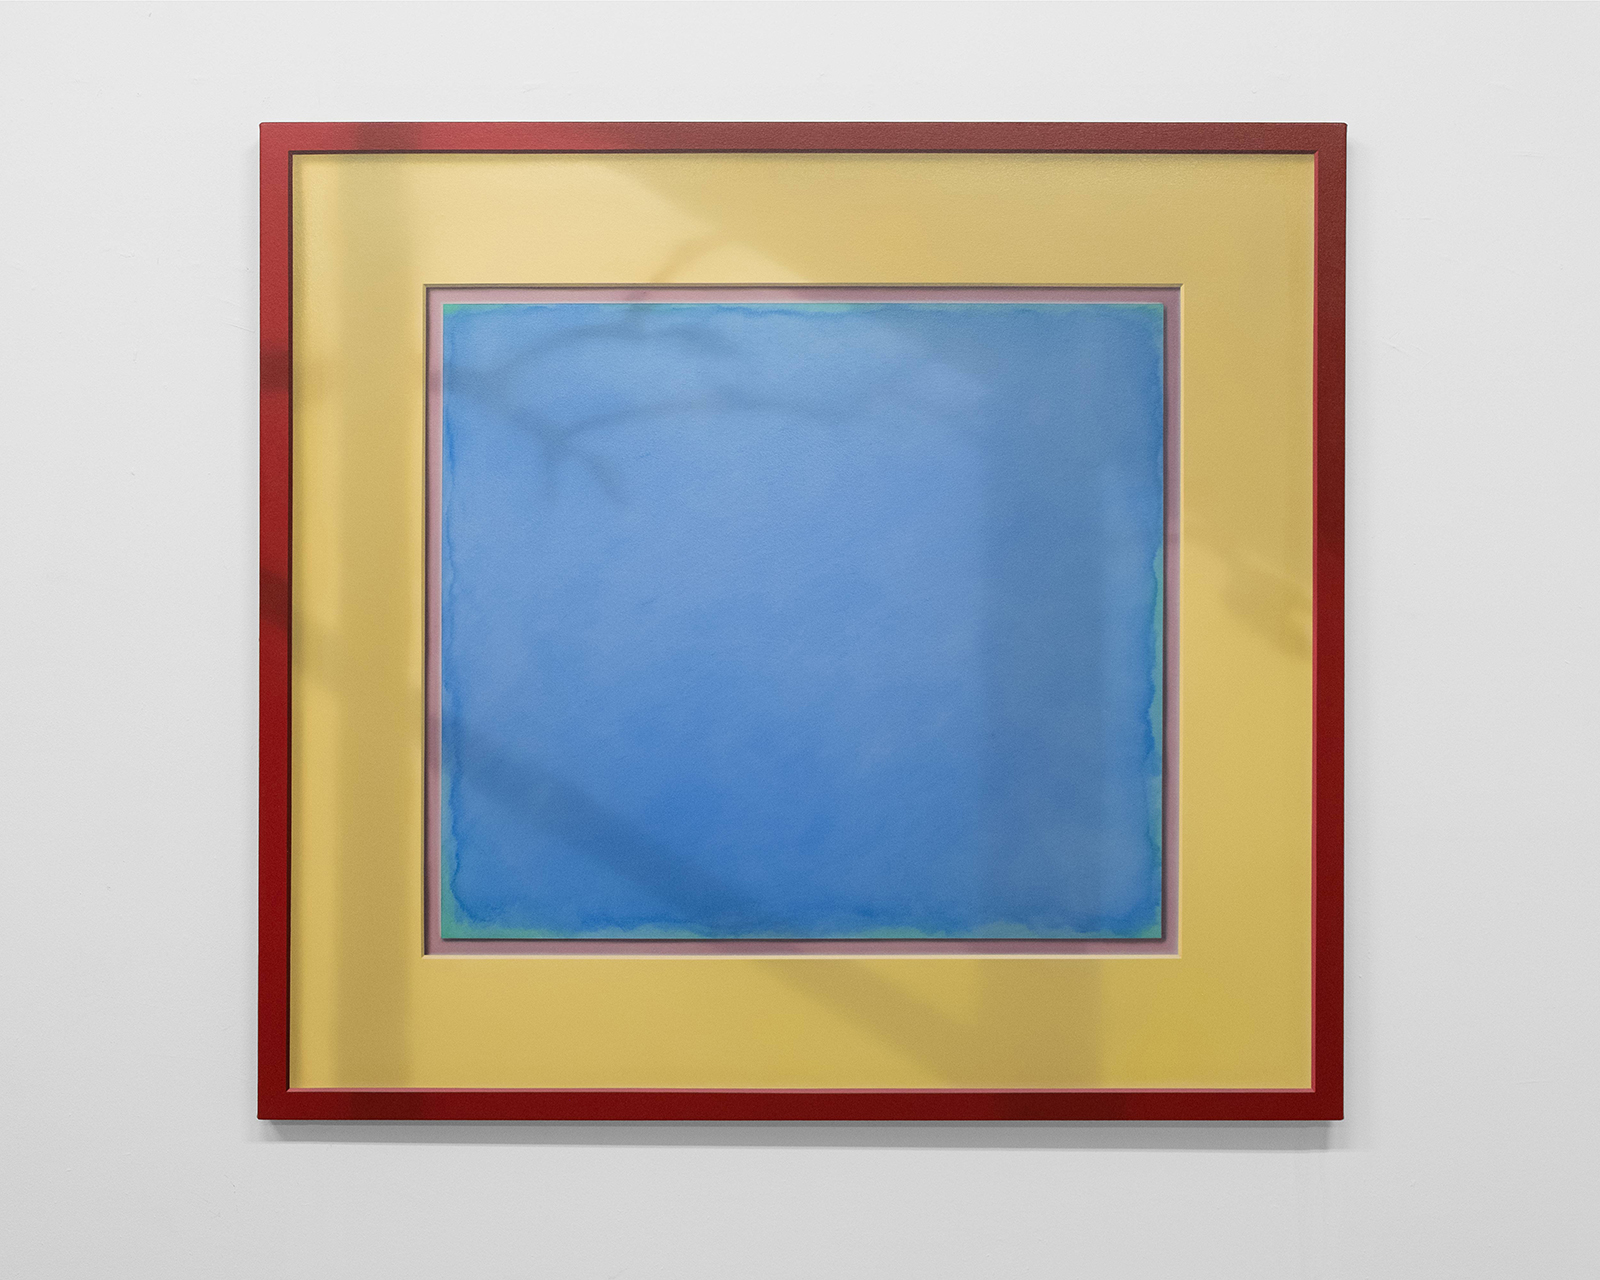 A square red frame, a square yellow mat, and a square blue painting